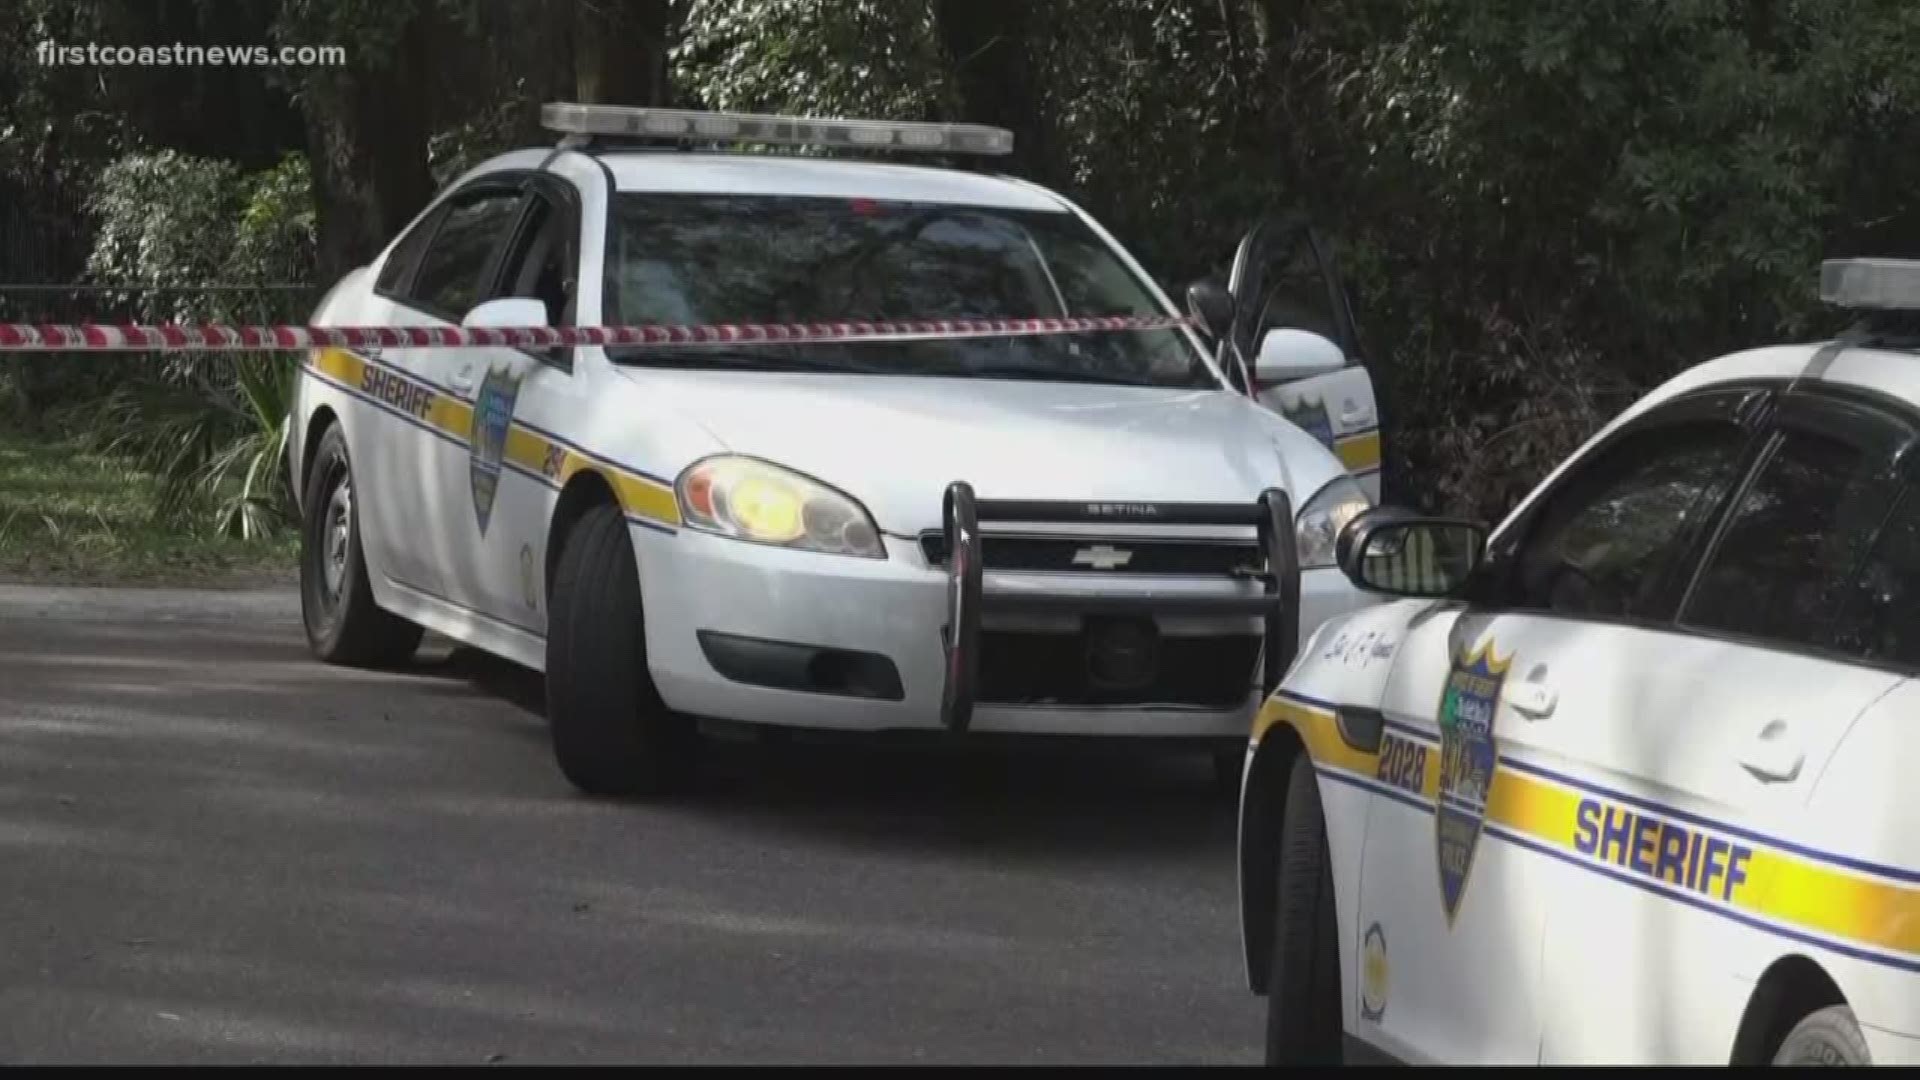 A woman was unharmed after her vehicle was caught in the crossfire of a shooting in Arlington and rolled into a ditch Wednesday, the Jacksonville Sheriff's Office told First Coast News.